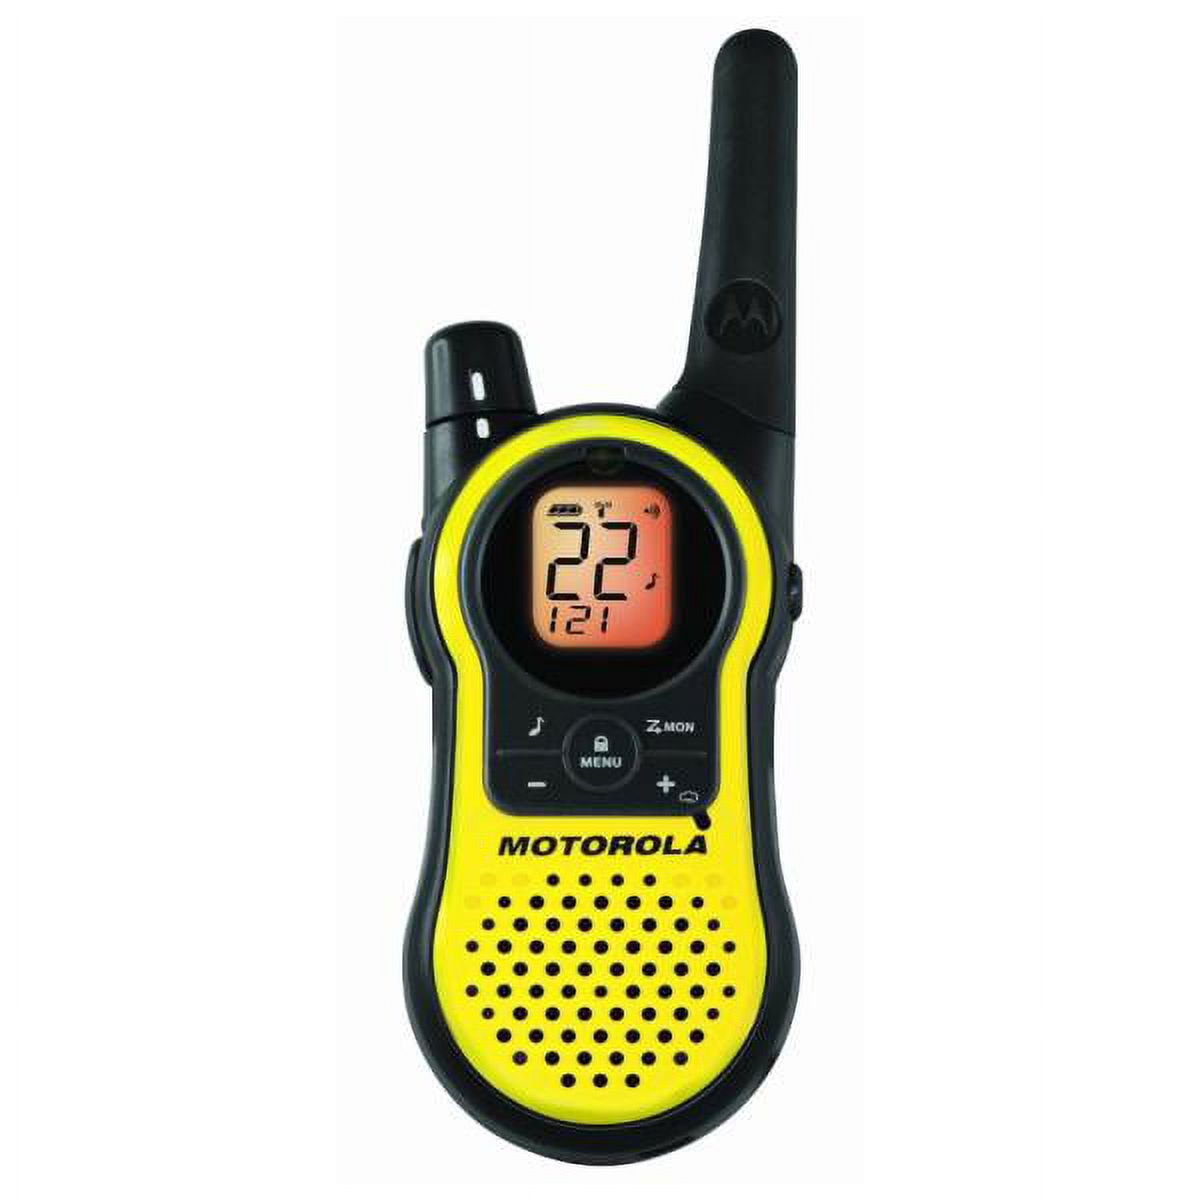 Talkabout 23-Mile Range 22 Channel Rechargeable 2-Way Radio - Yellow - image 5 of 5